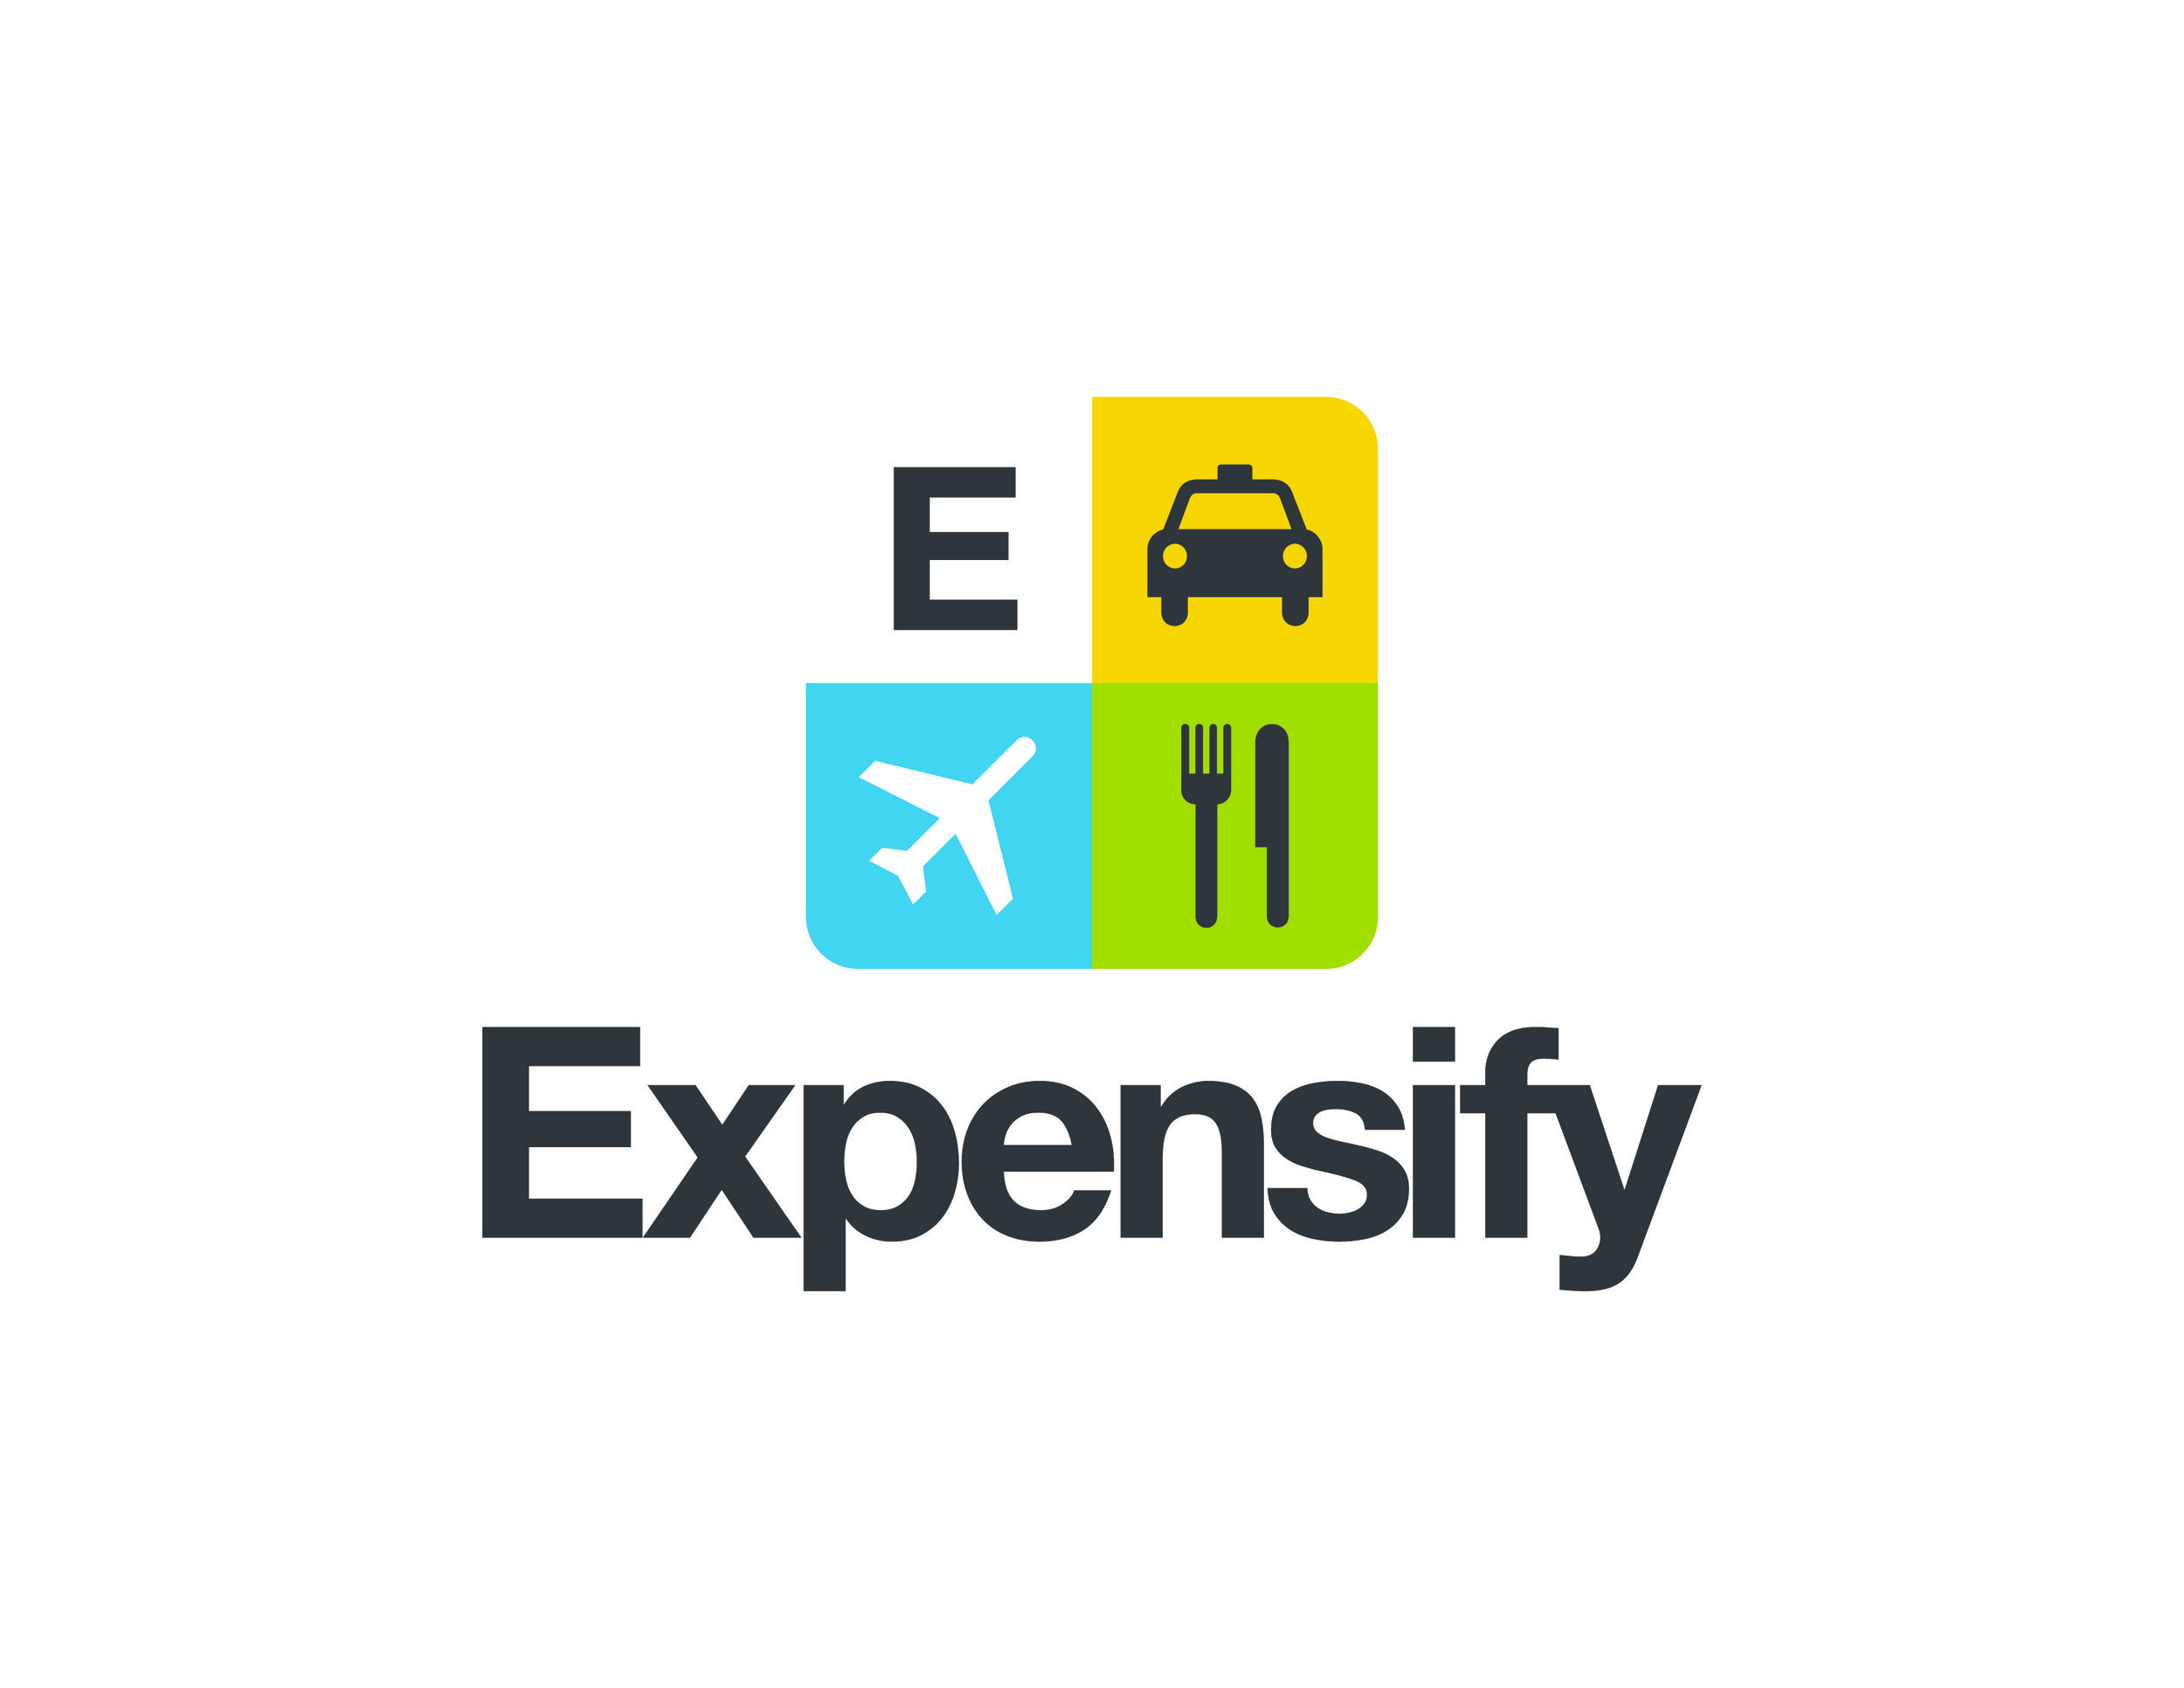 Expensify  is a one of the most promising fintech startups out of San Francisco